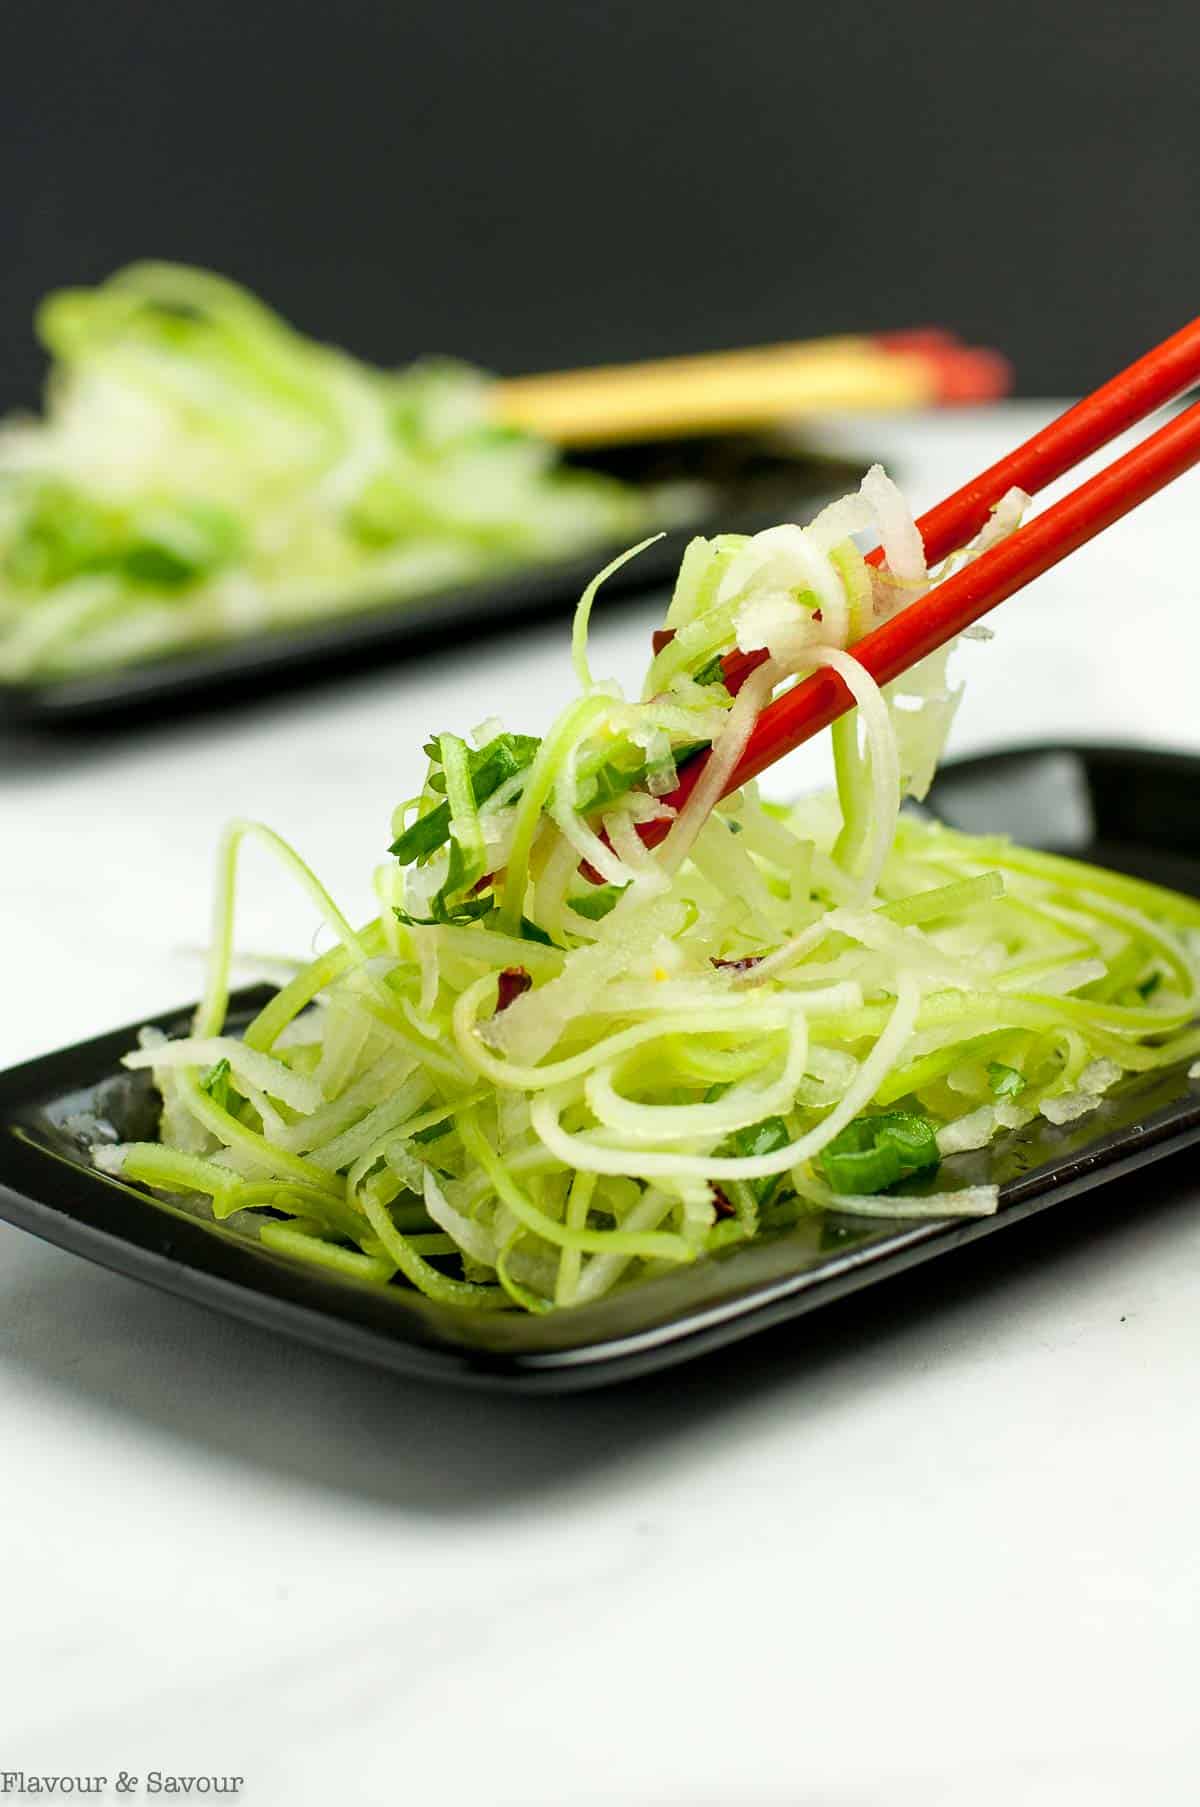 A pair of red chopsticks lifting Asian Pear Slaw from a small black plate.